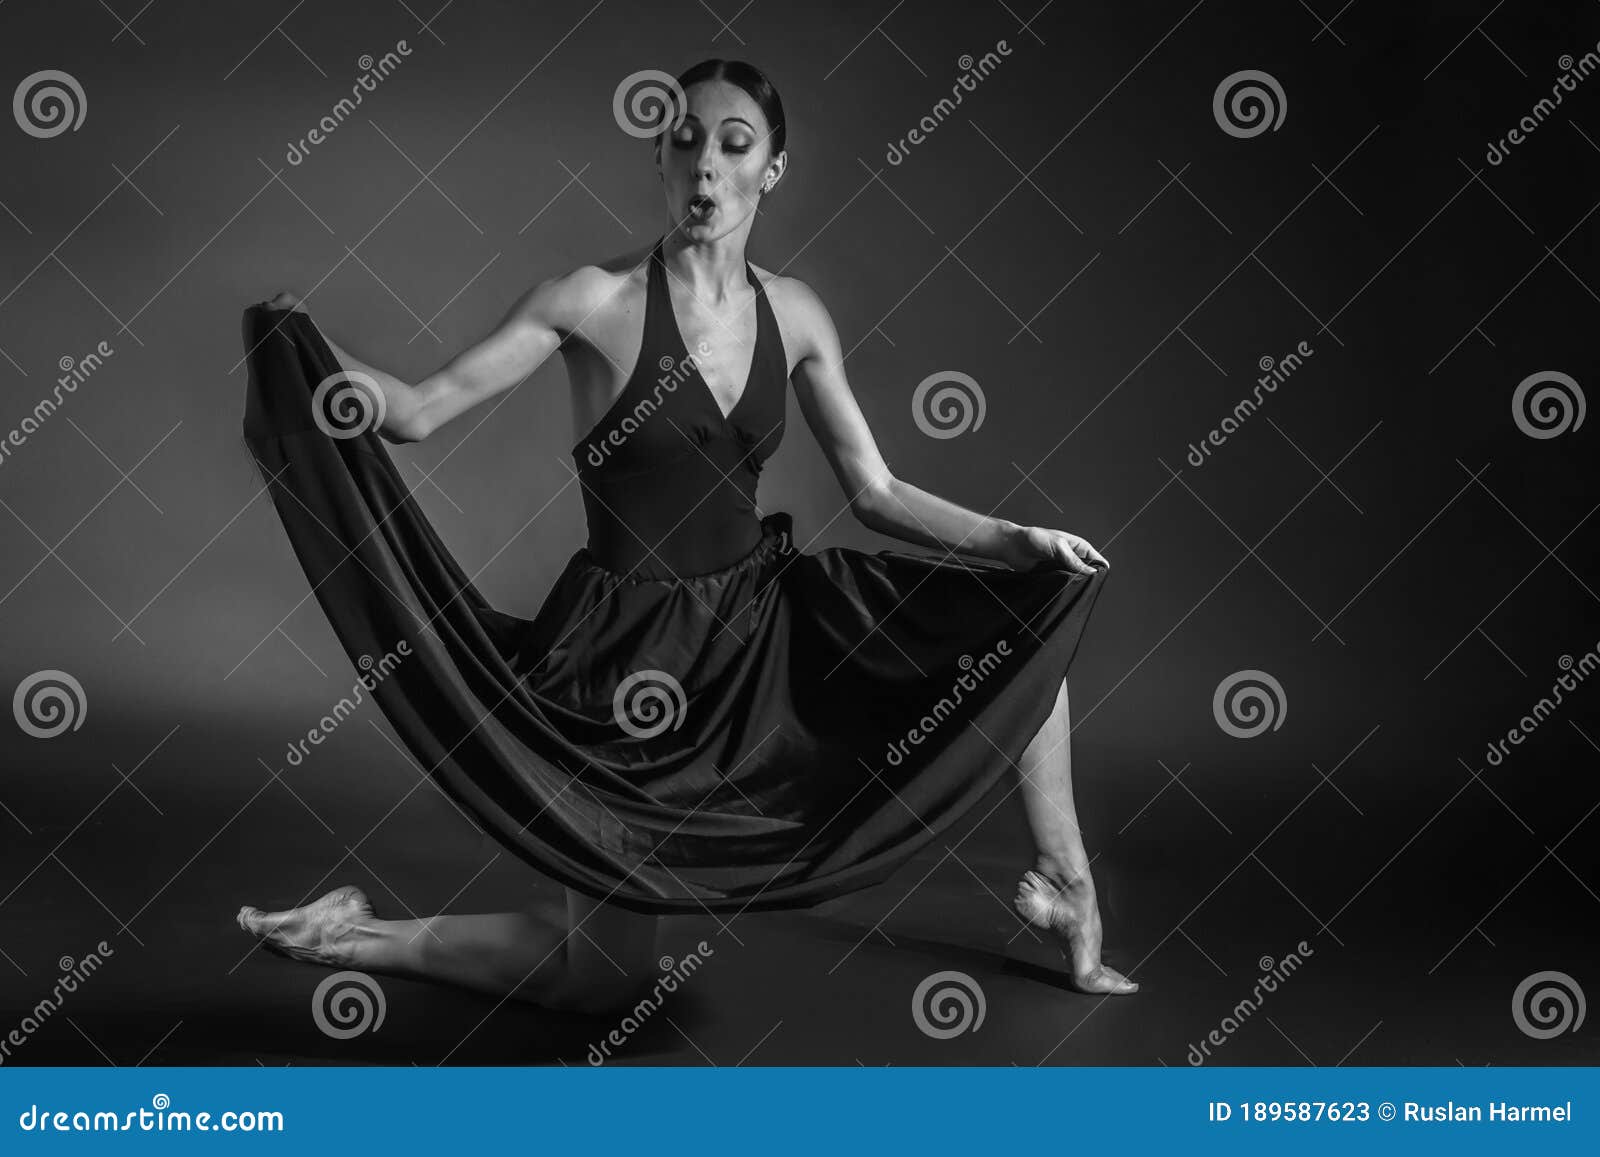 Black And White Vintage Dramatic Portrait Of A Dancing Girl-ballerina ...